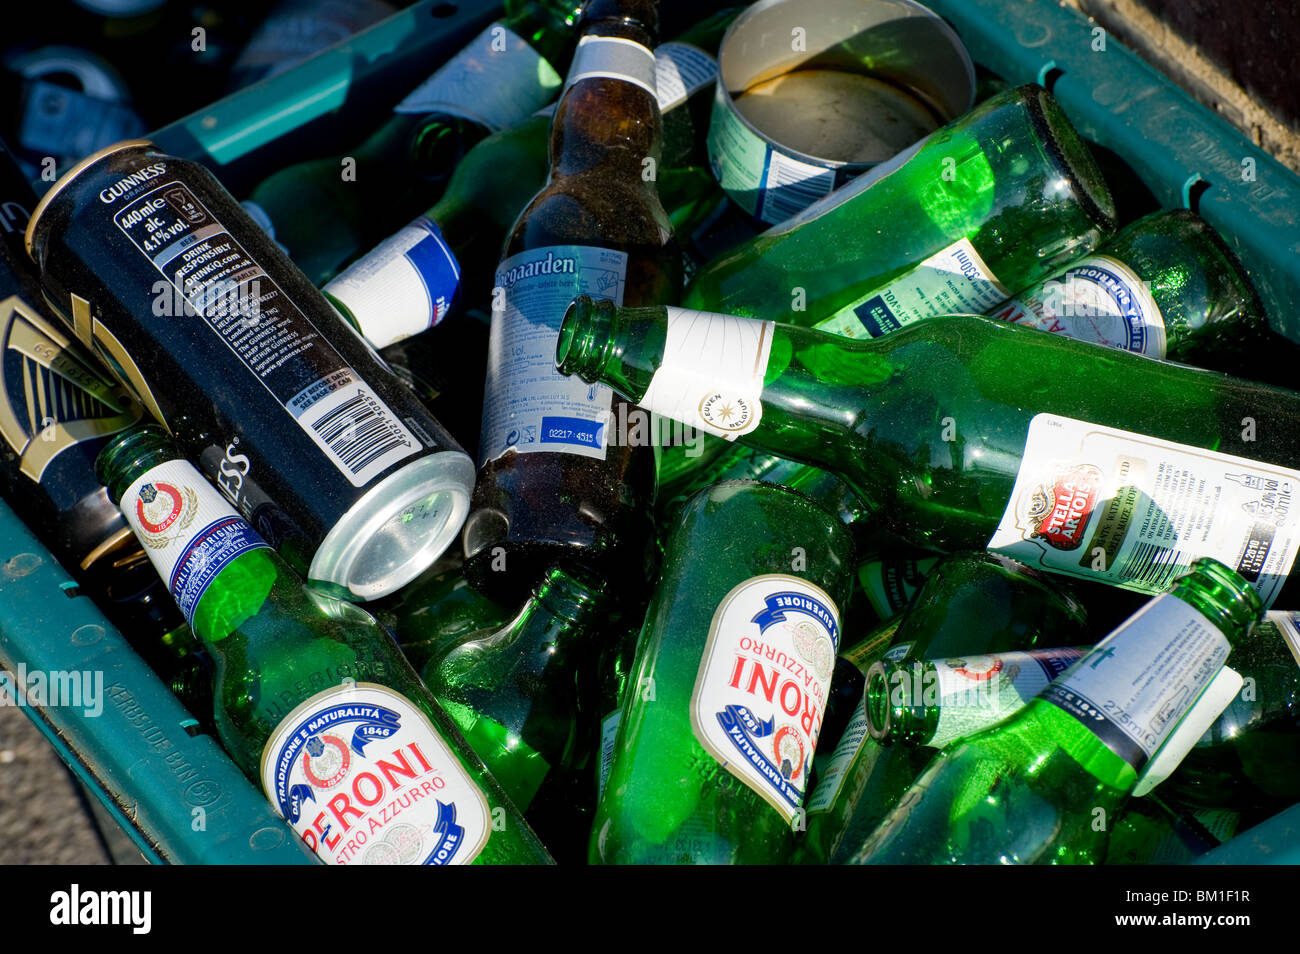 Glass beer bottles awaiting collection in a recycling bin Stock Photo ...